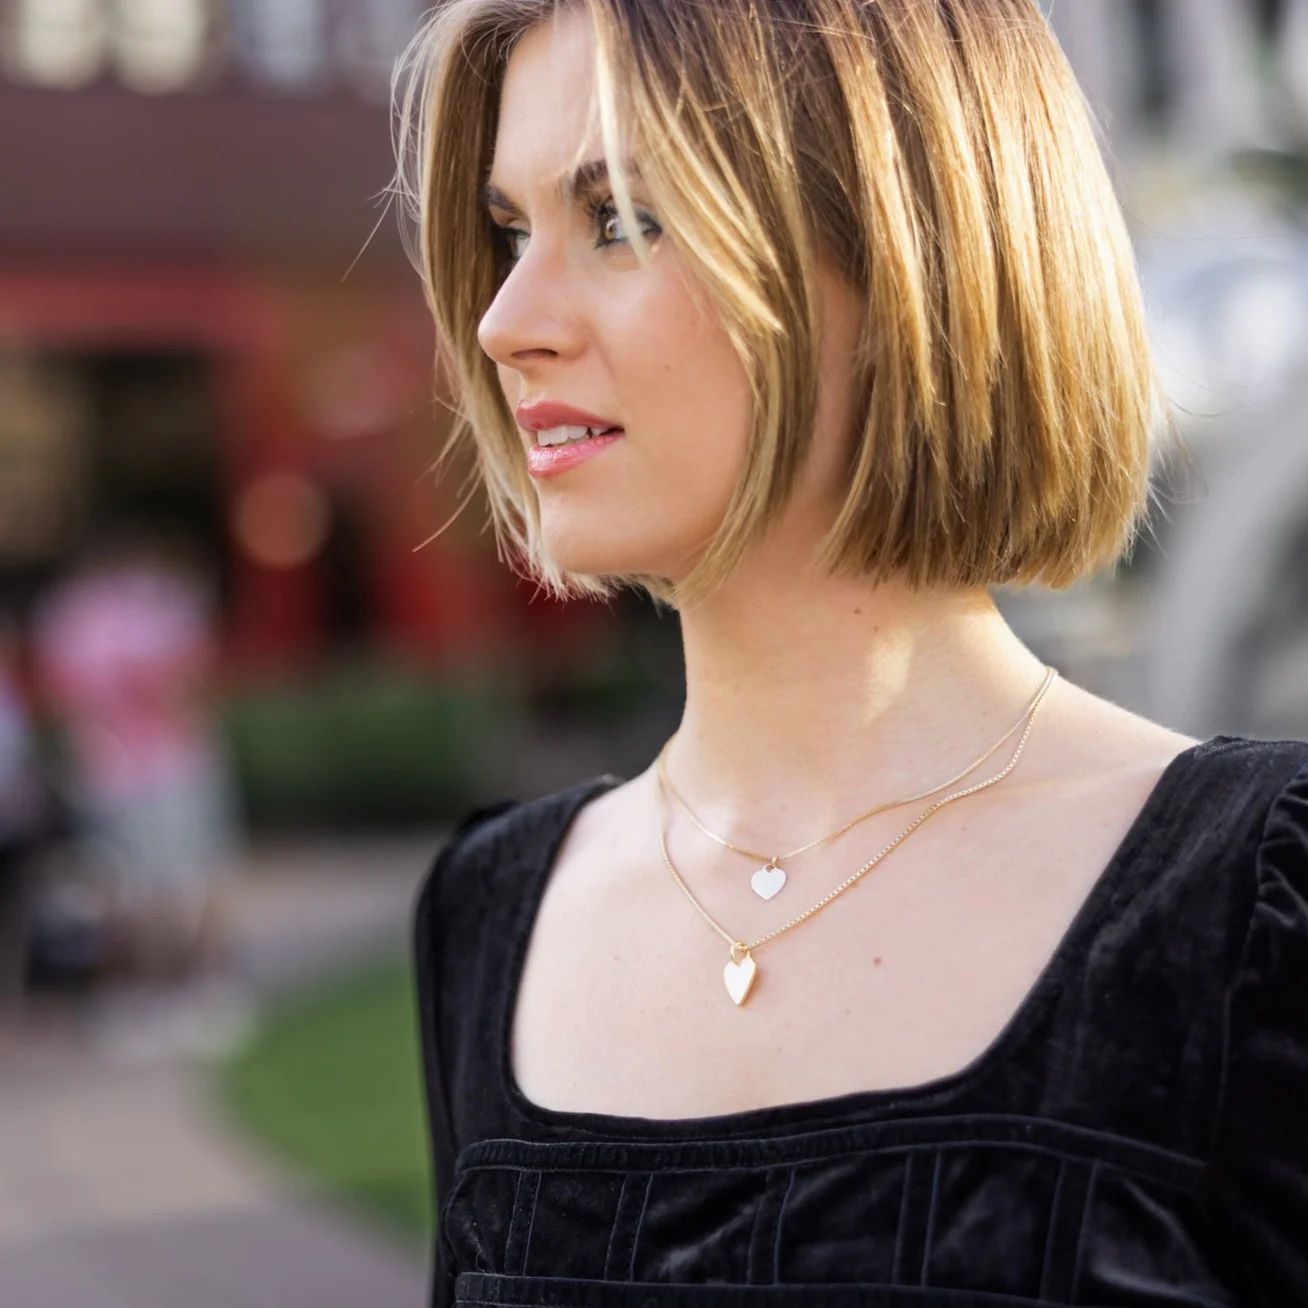 The Amour Necklace by Megan Pintell | Taudrey